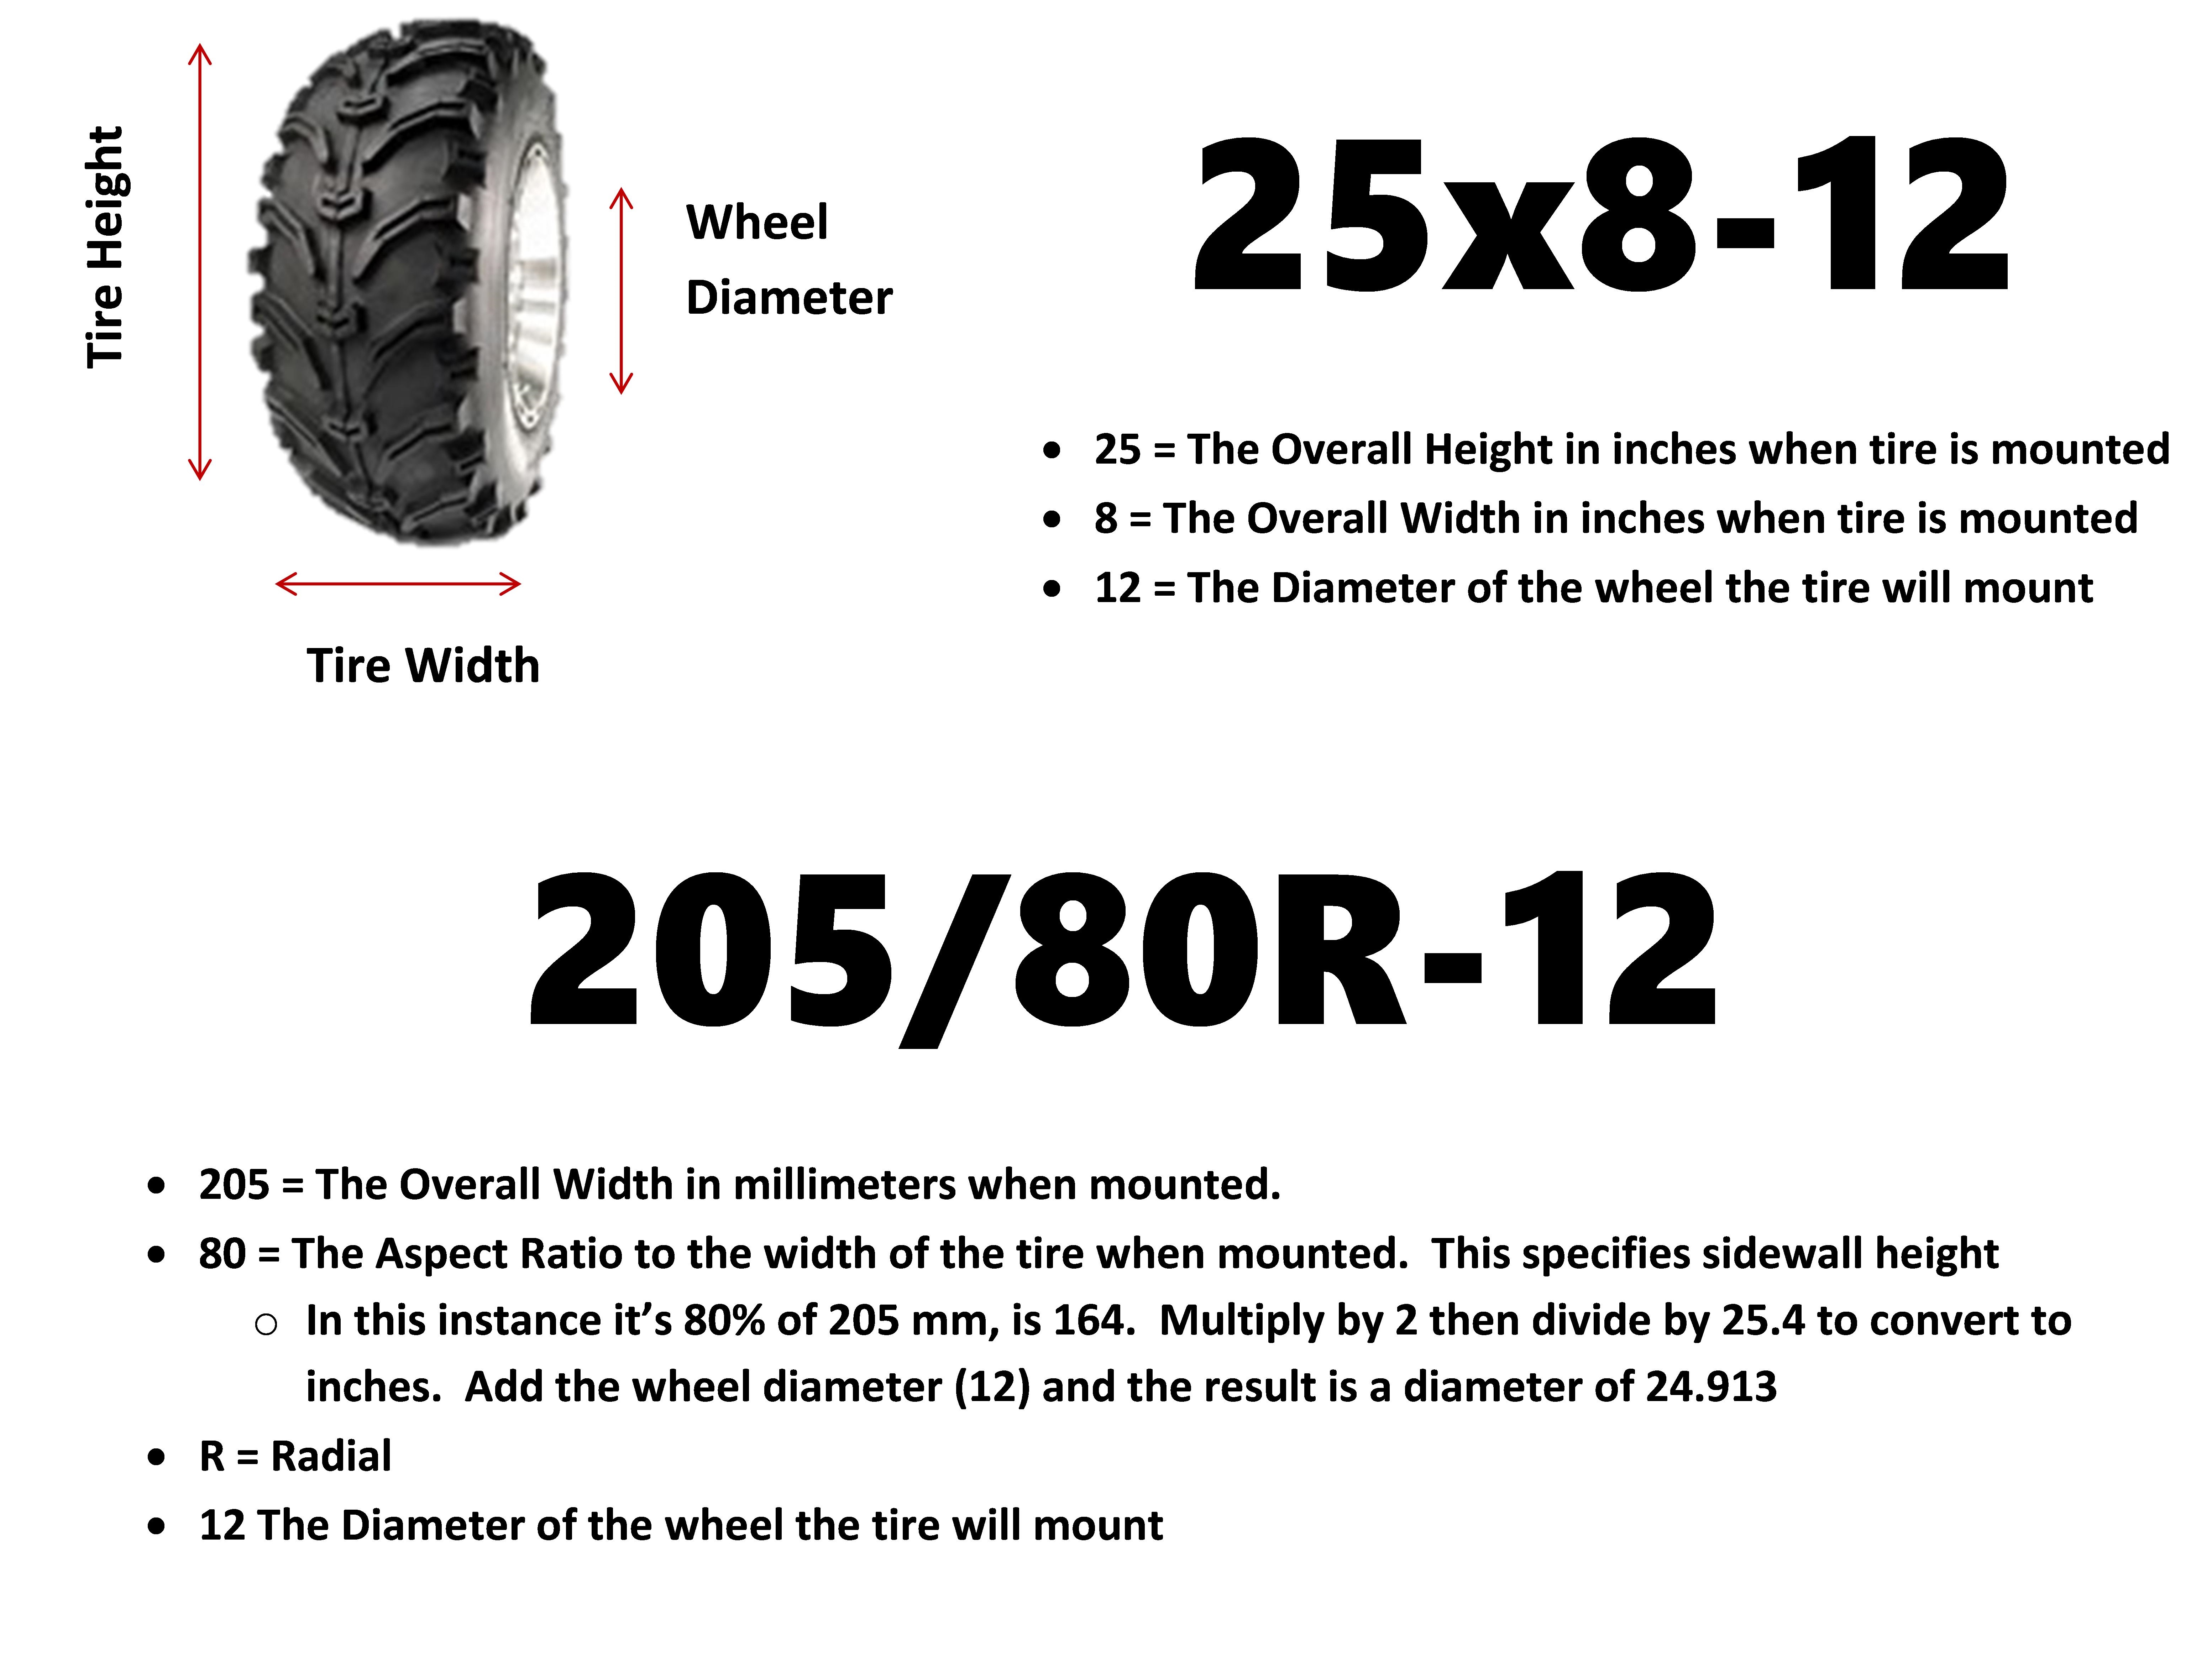 atv-tire-measuring-tires4that-by-gallagher-tire